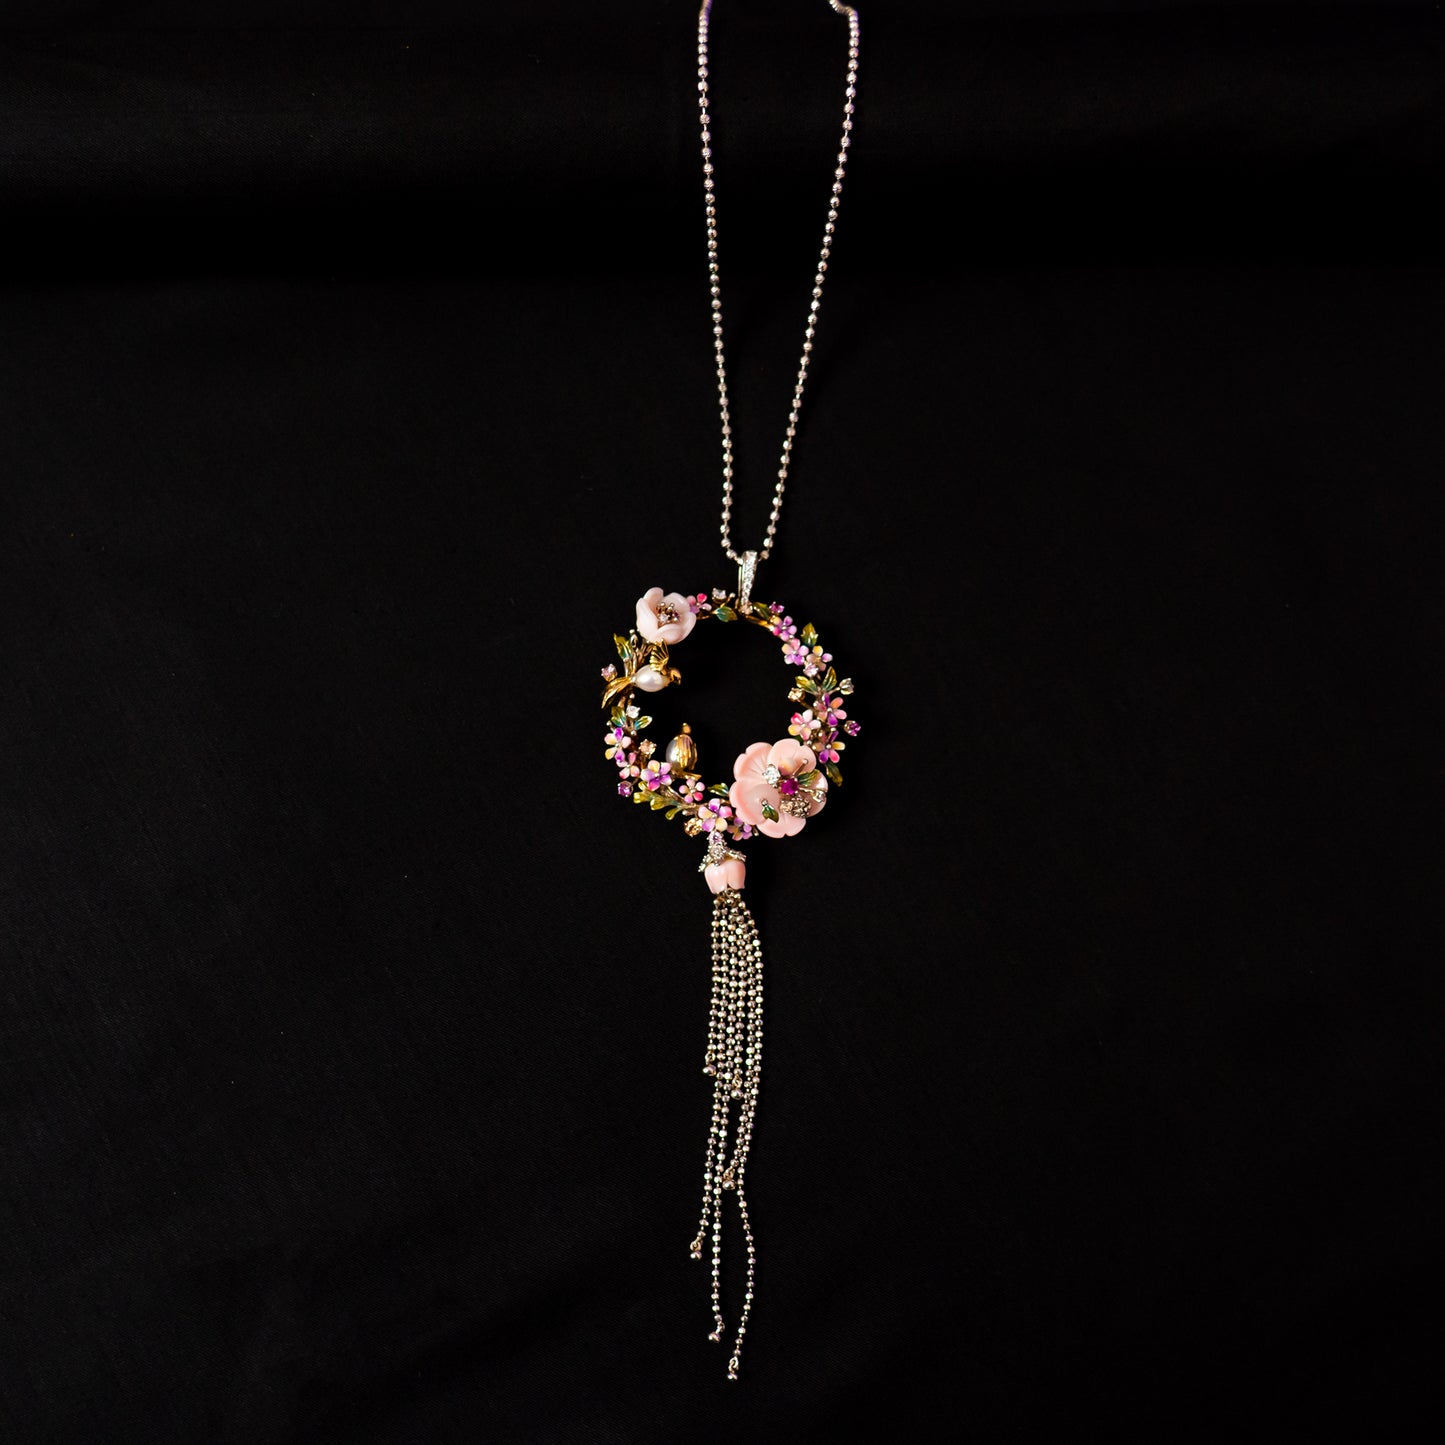 Eesha 92.5 silver chain, everyday silver chain with intricate rose-polish designs featuring cz stones and pearls